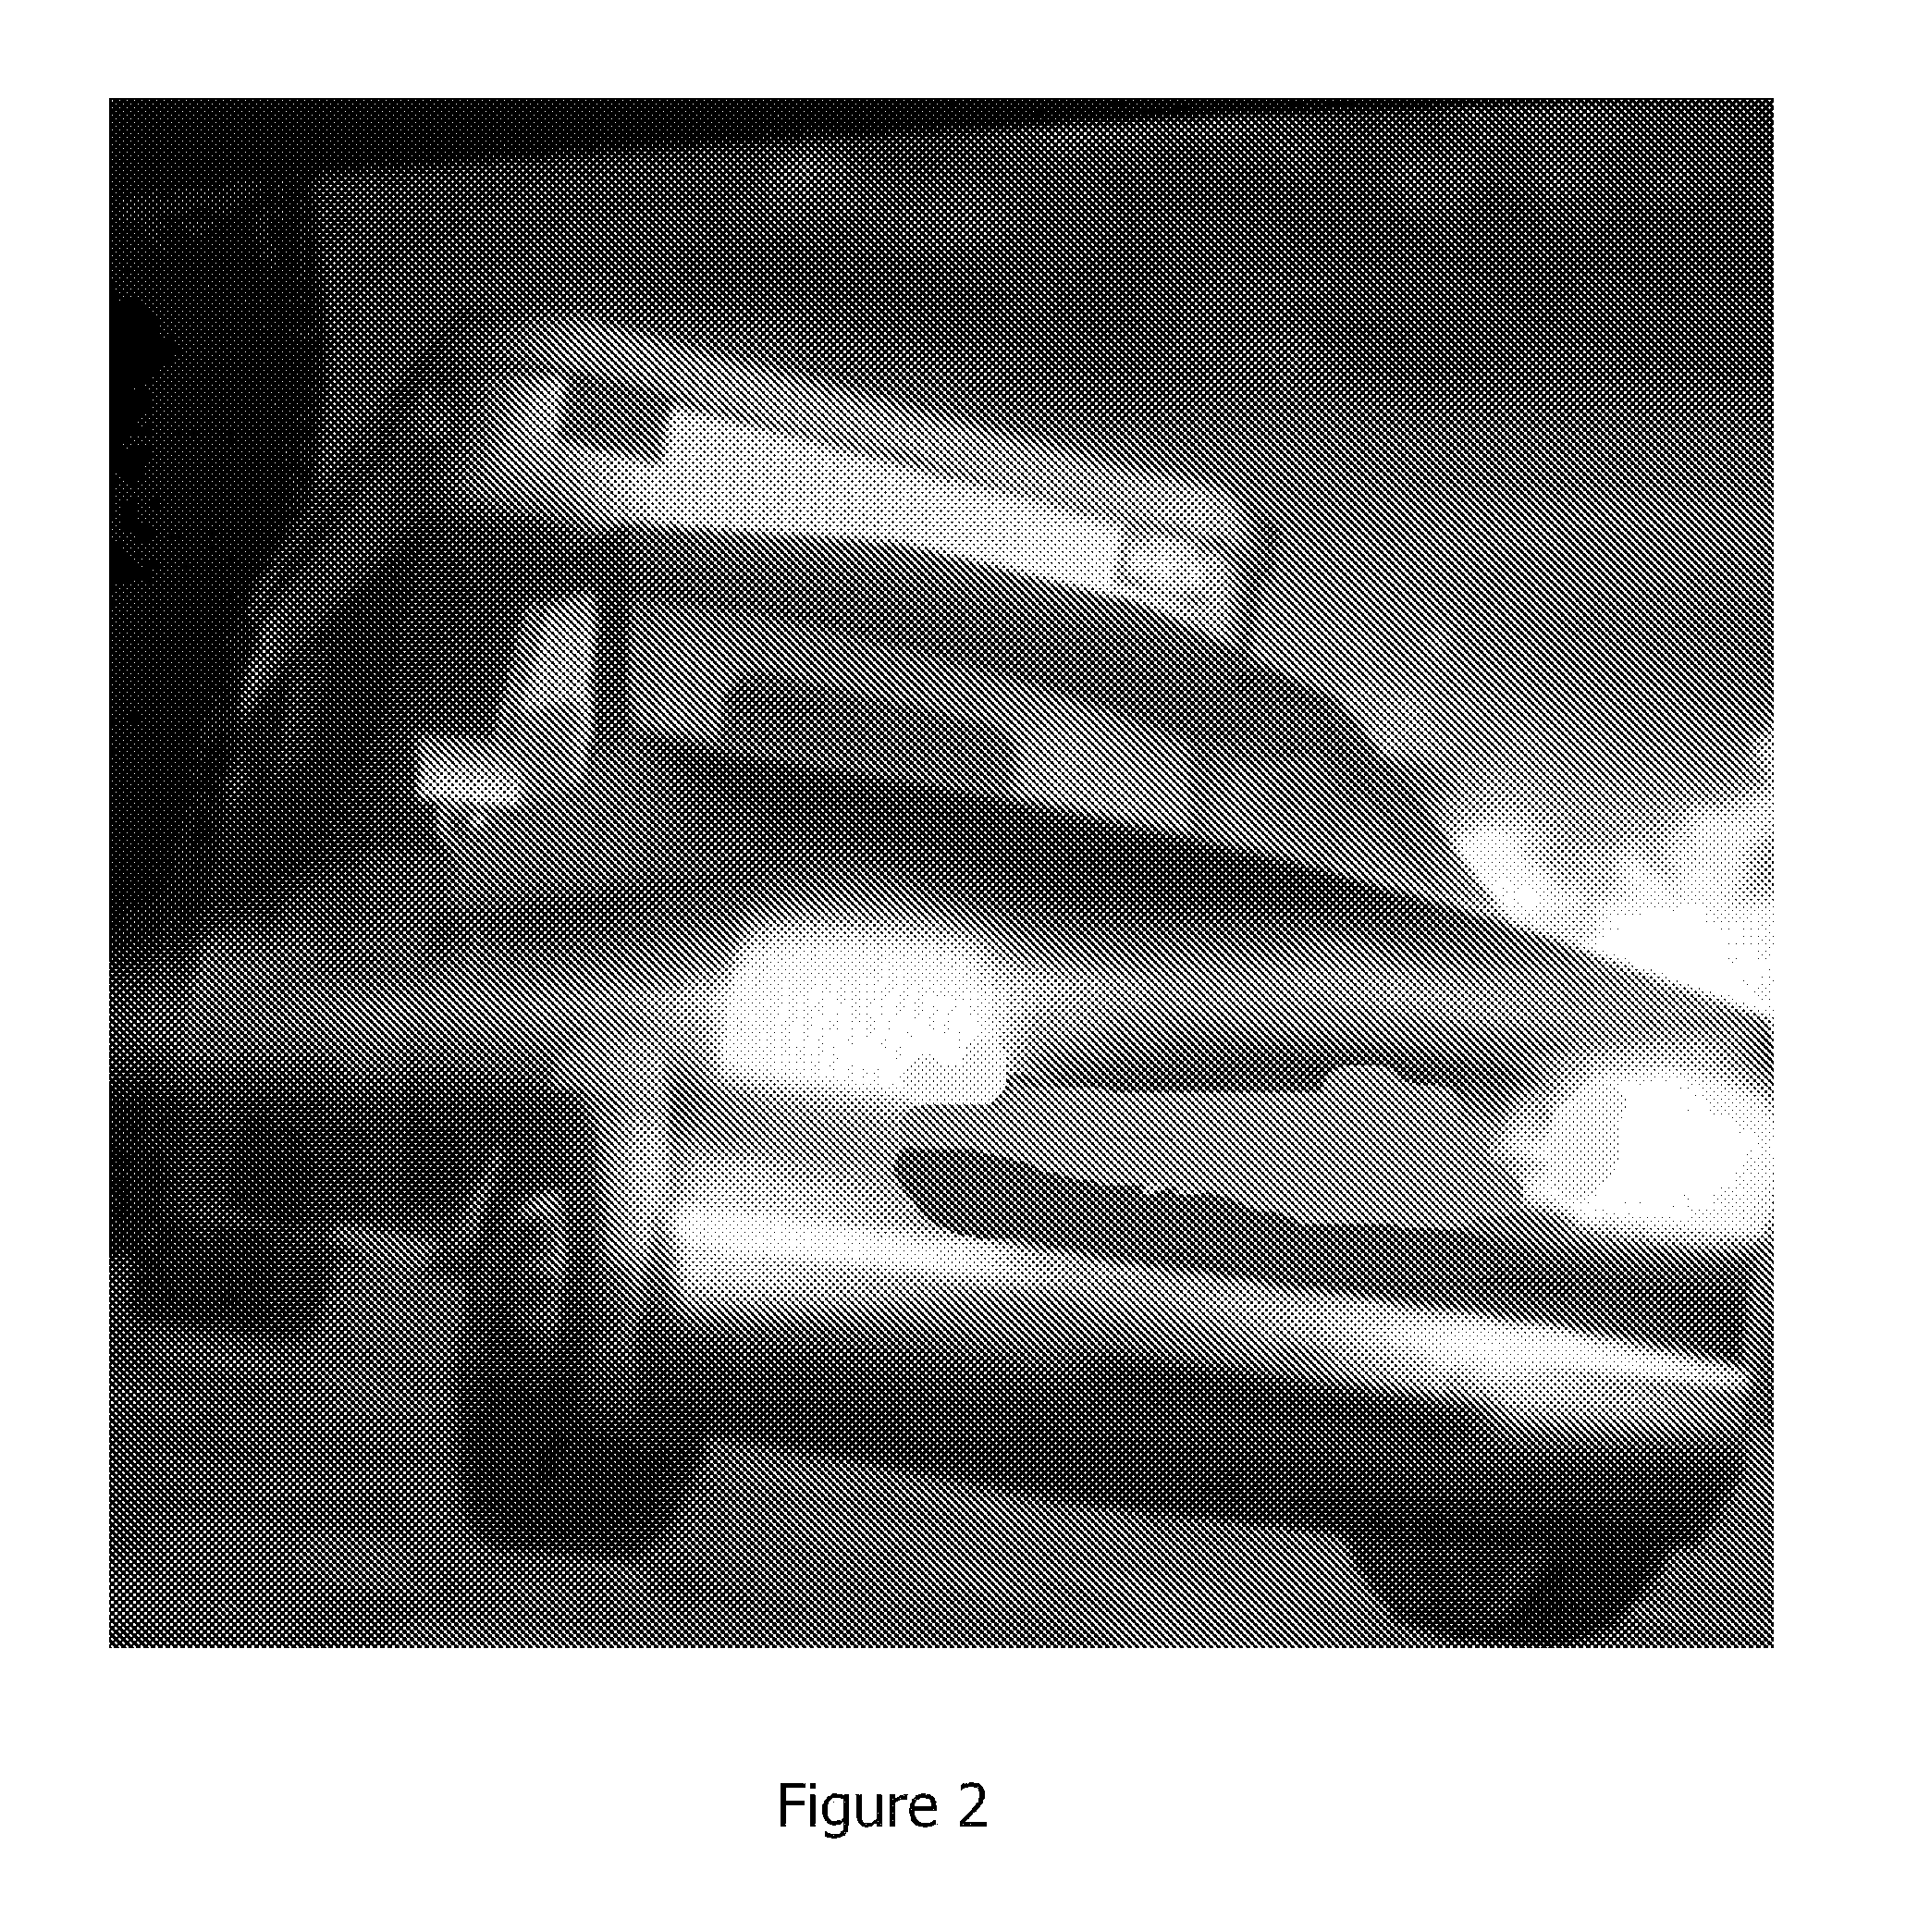 System and Method for Gamefied Rapid Application Development Environment